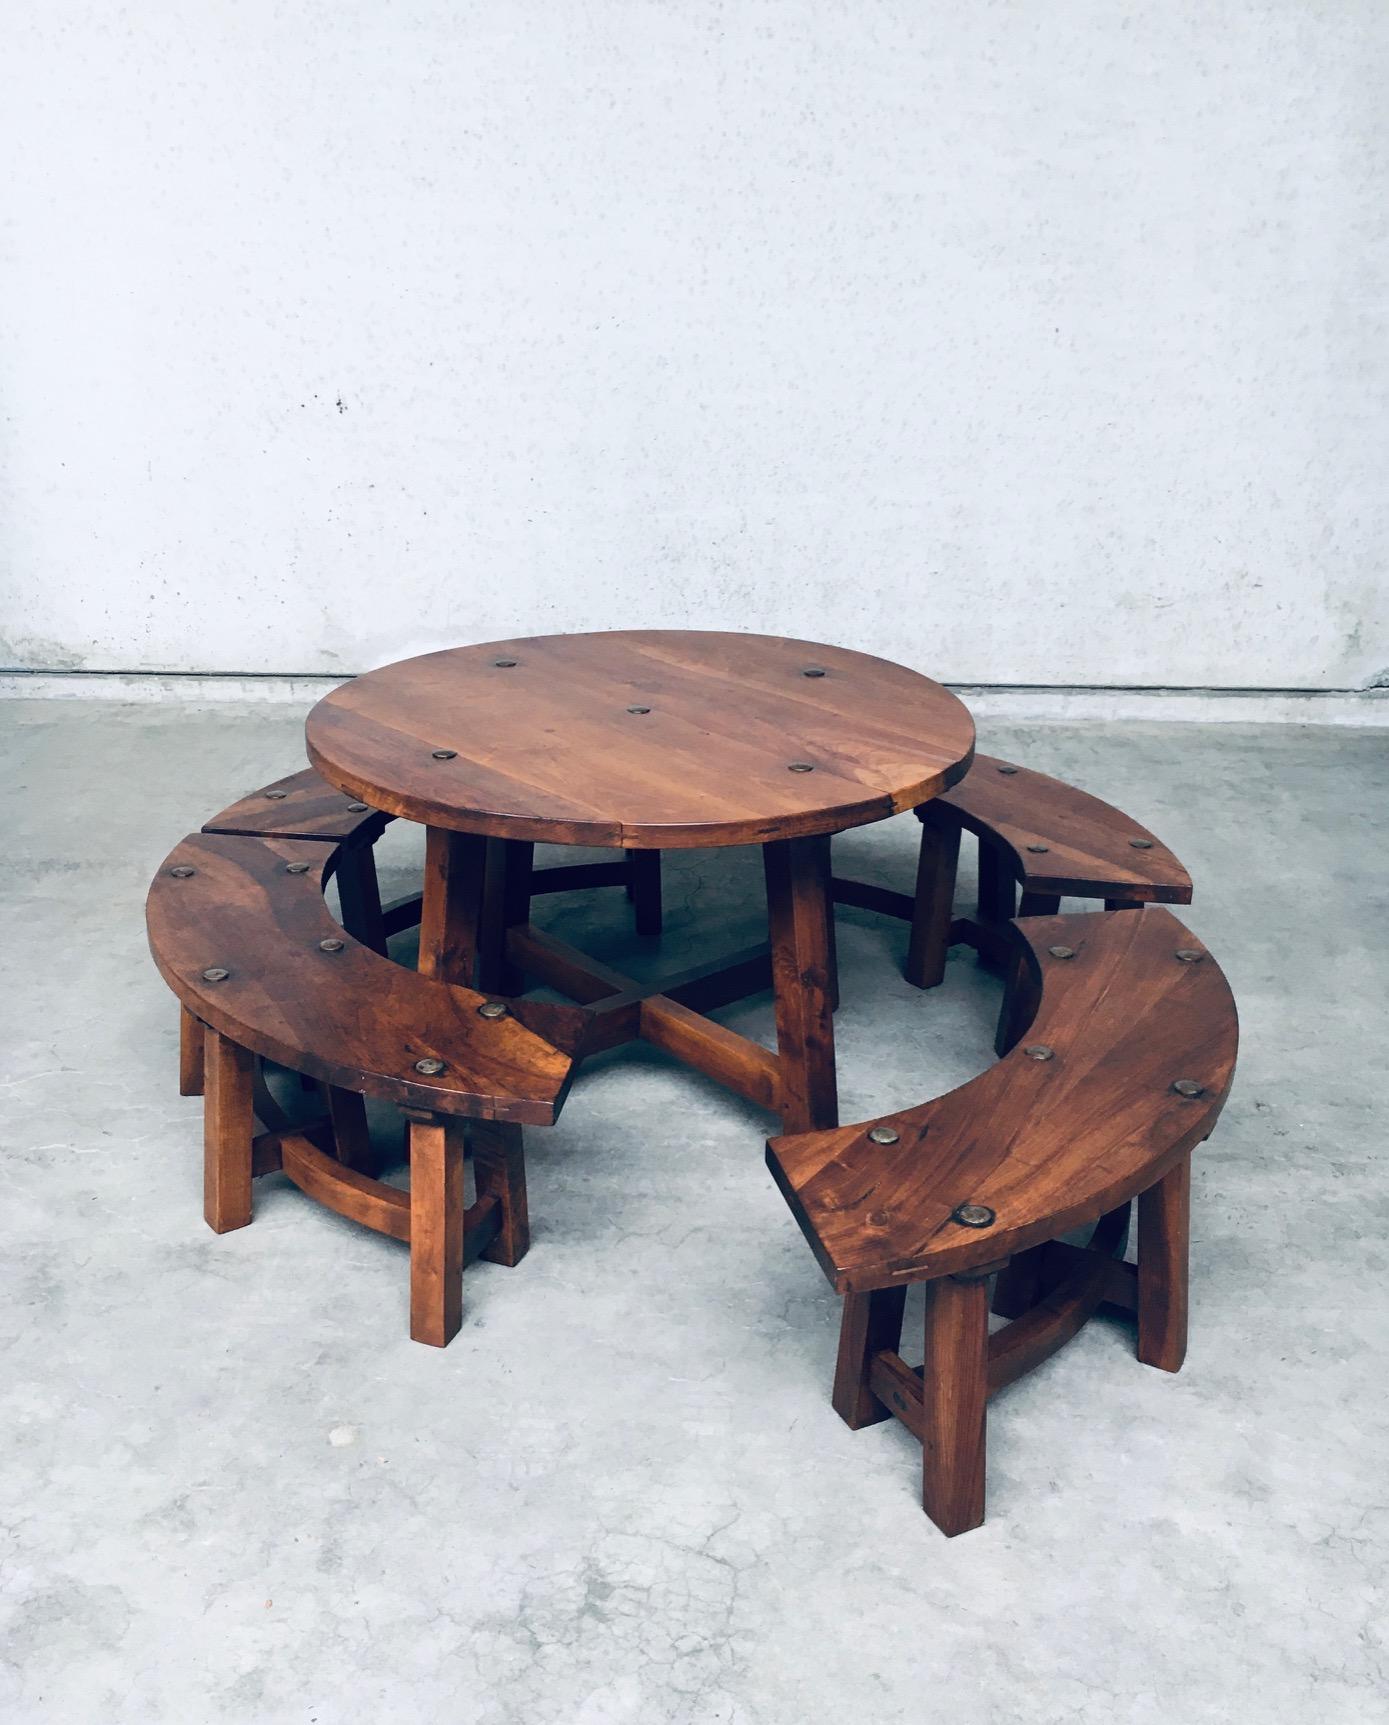 Mid-20th Century Midcentury French Alps Chalet Style Round Table & 4 Benches, France 1950's